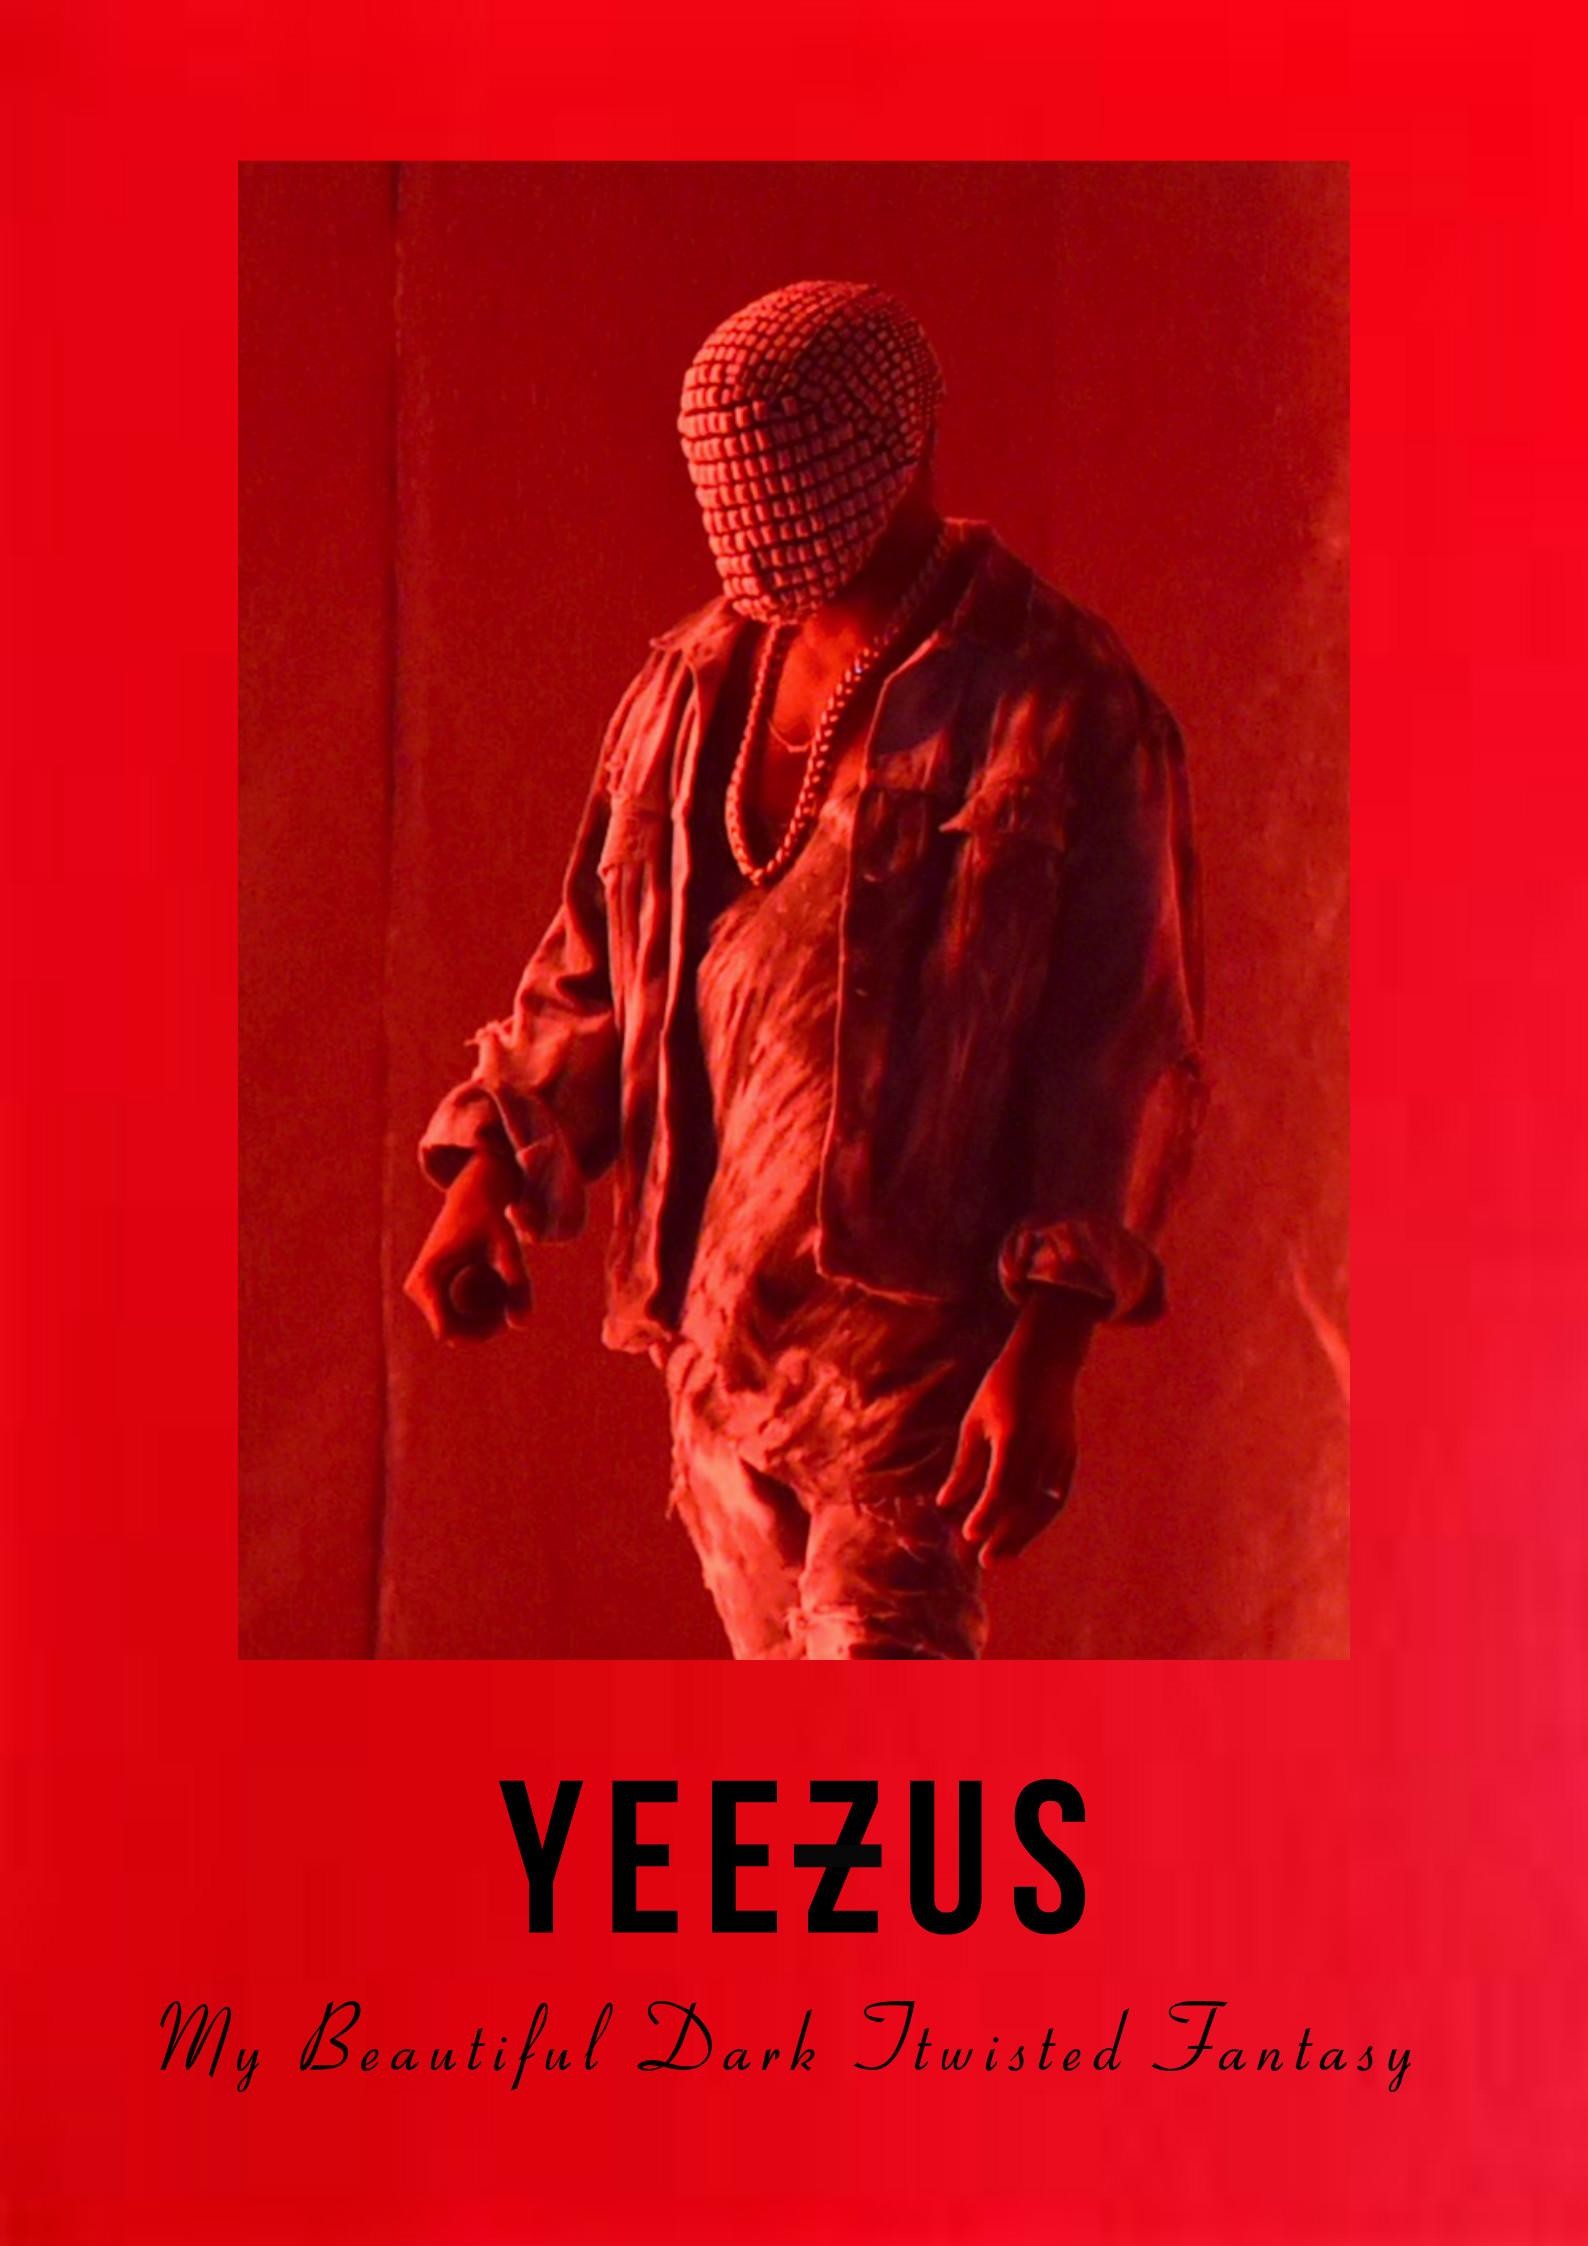 1588x2246 MBDTF Poster / IPhone Wallpaper I Made, Thought You Guys Would Like This ...